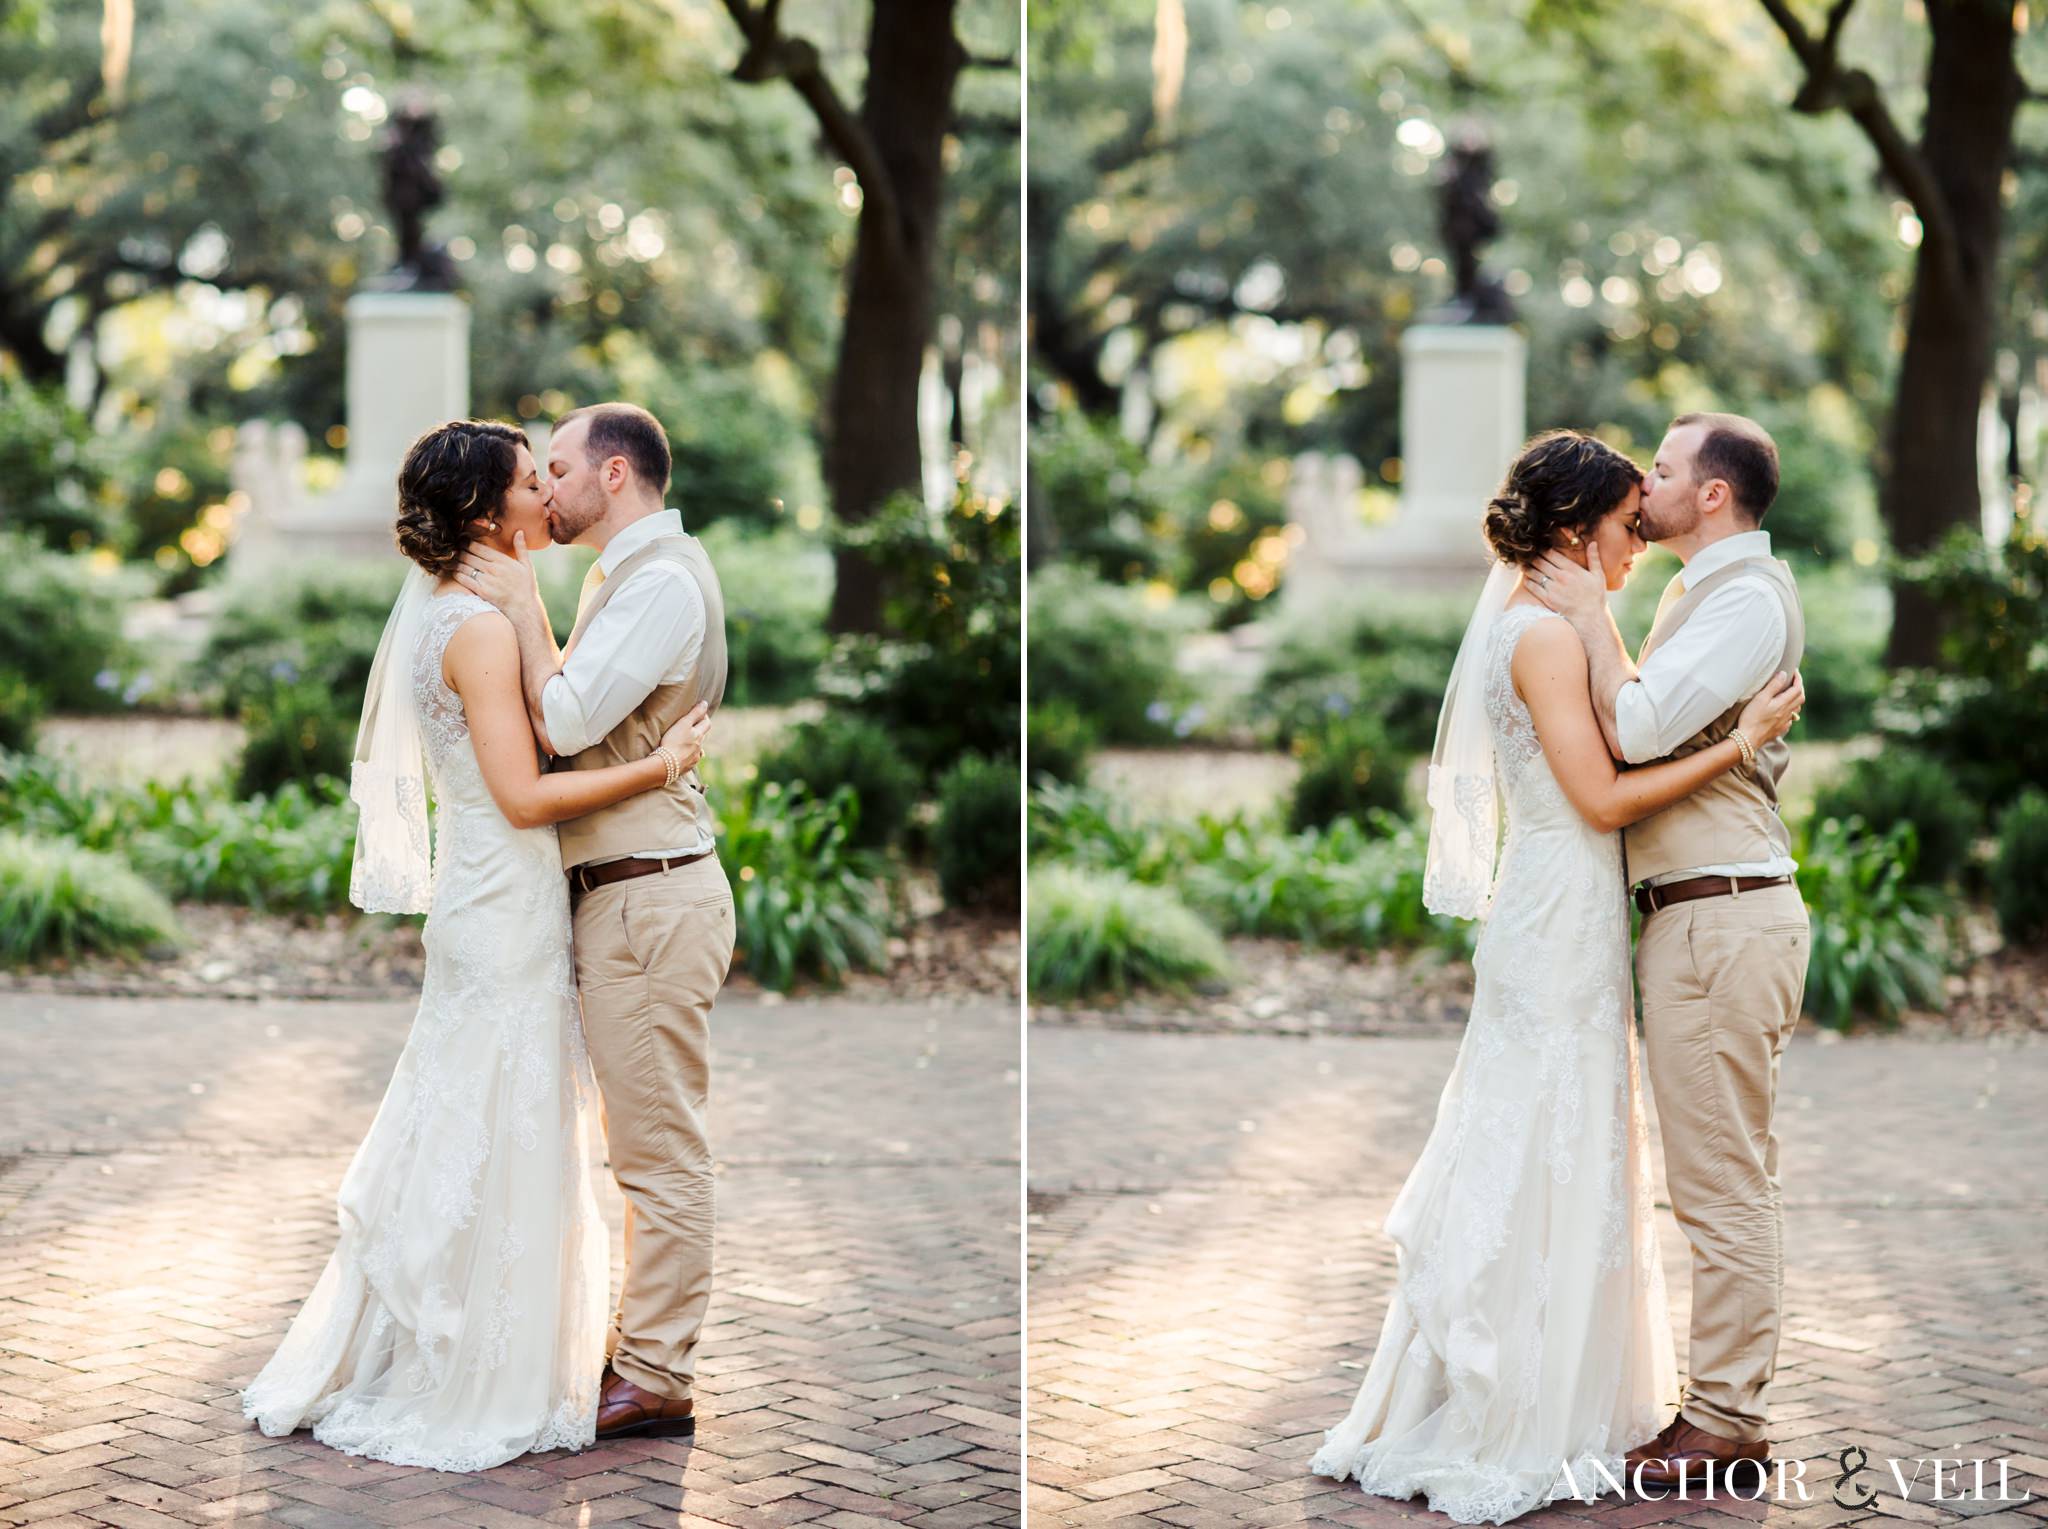 Sweet kisses on the forehead in the park during their Forsyth Park Wedding Elopement